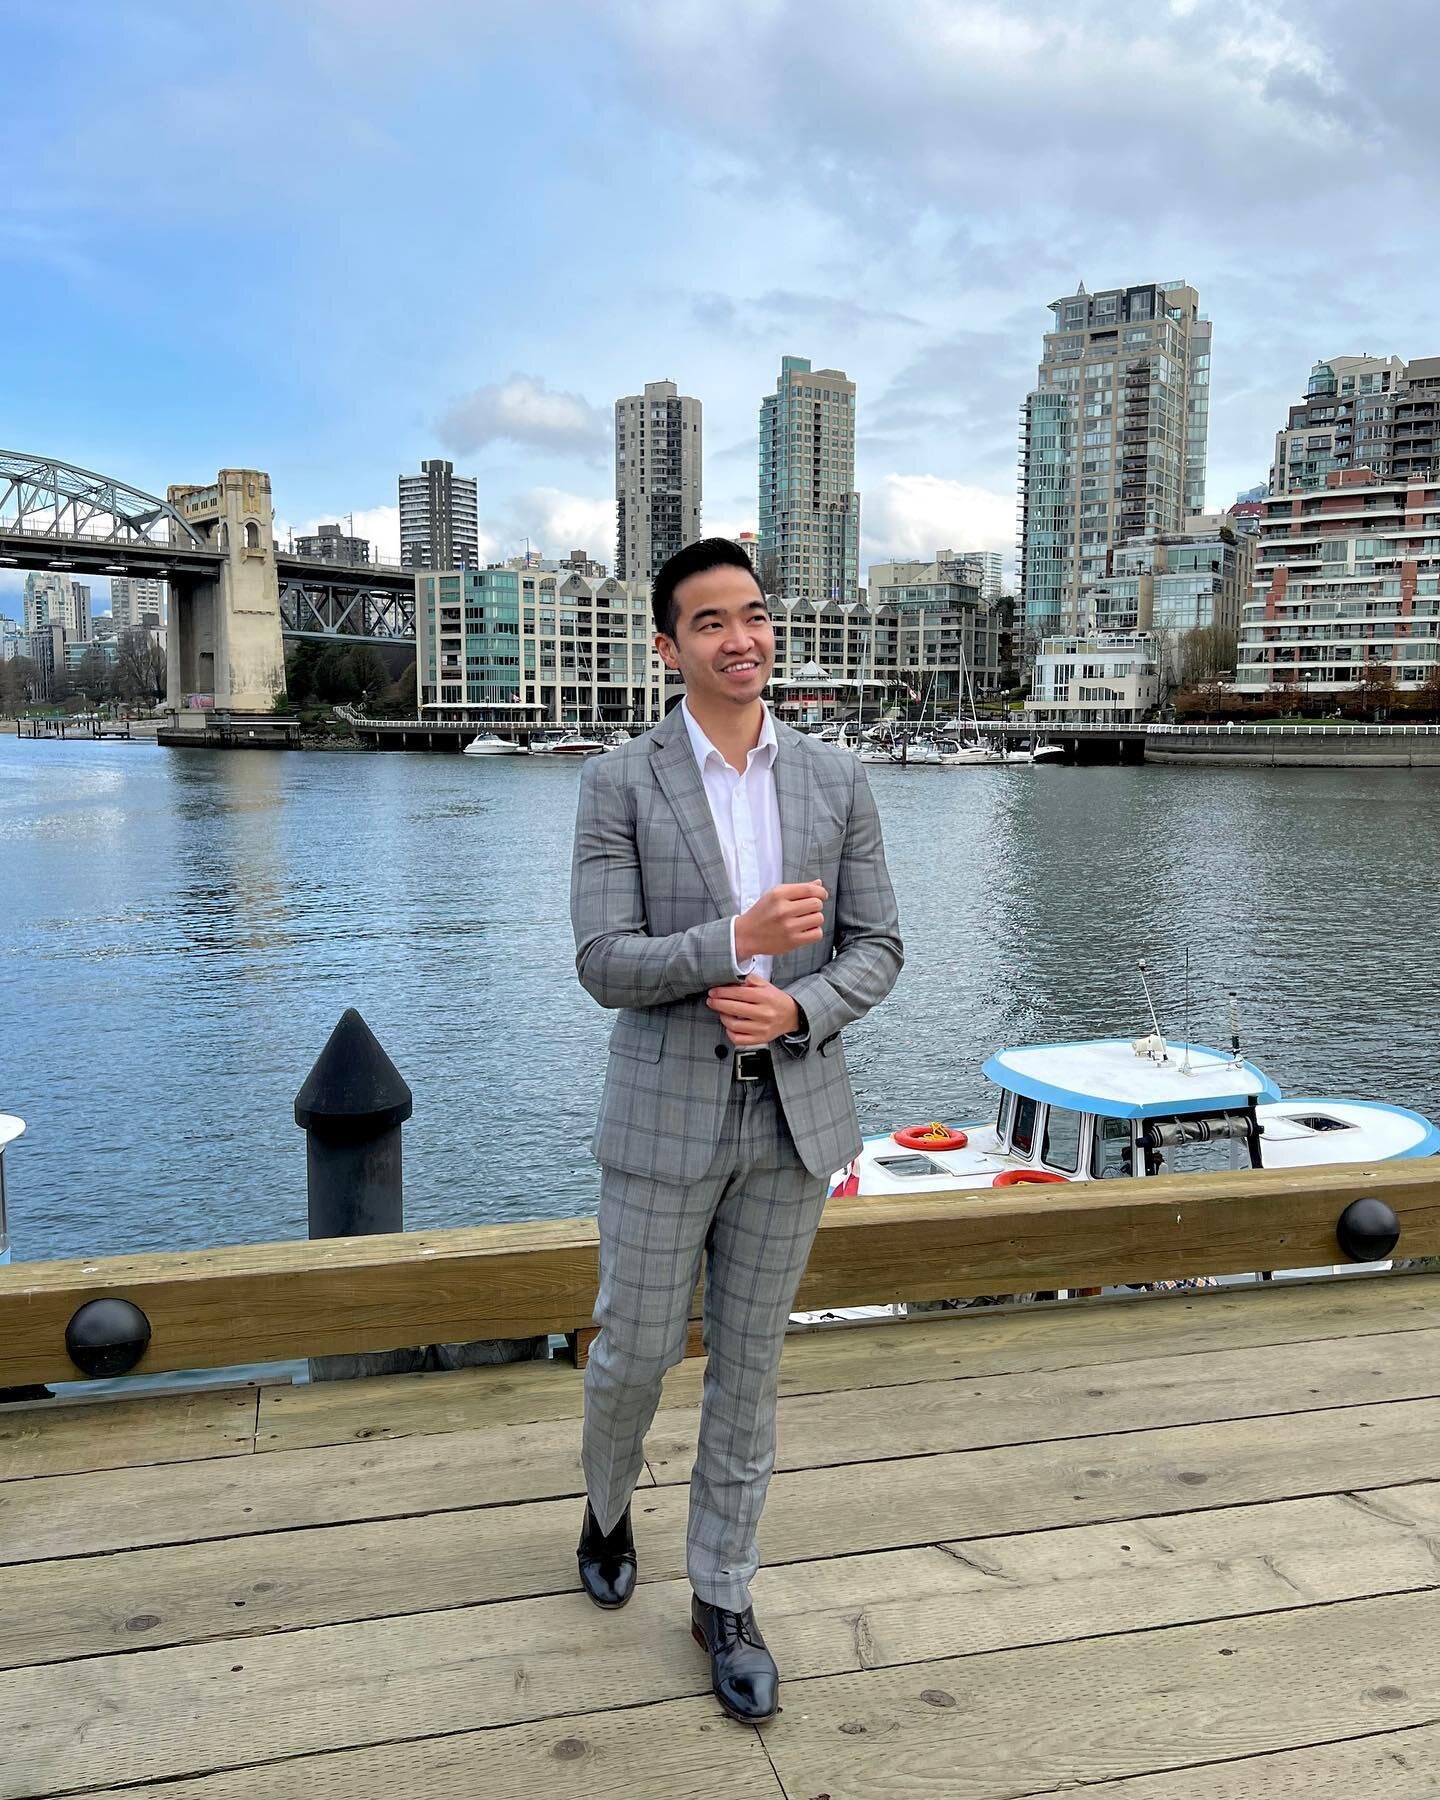 💭Daydreaming about an Empire💭

Do you want to live in Vancouver? Do you daydream of having MULTIPLE houses 🏘️ in Vancouver for yourself and to build rental income 💰? 

If you&rsquo;re like me, the answer is YES! So lets make it happen!

Let&rsquo